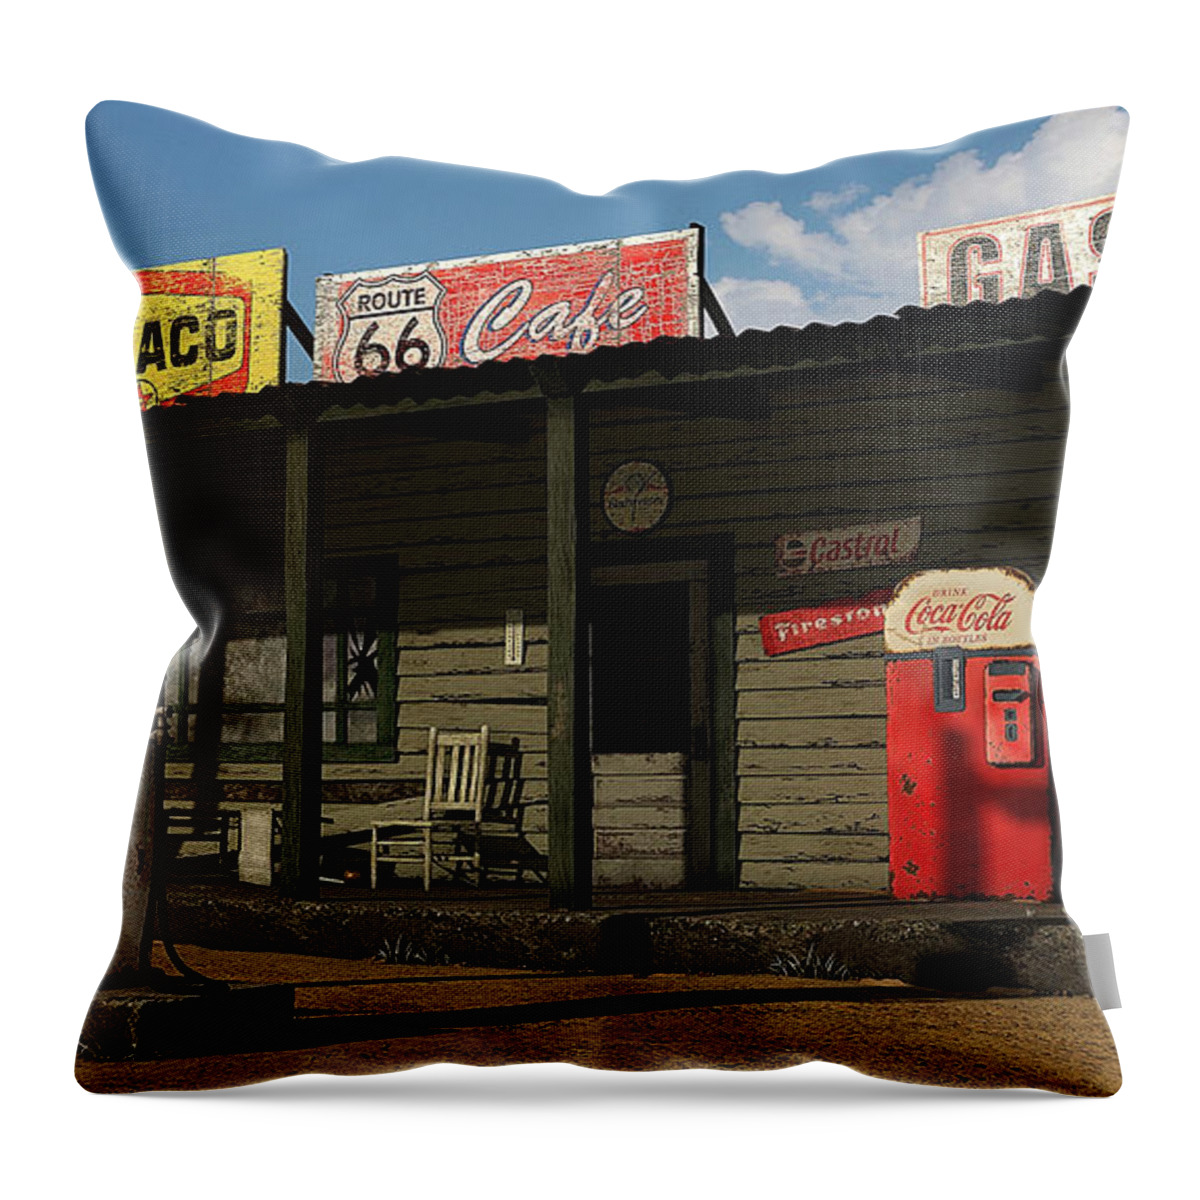 Old Gas Pump Throw Pillow featuring the digital art Old Gas Station 2 by Marvin Blaine